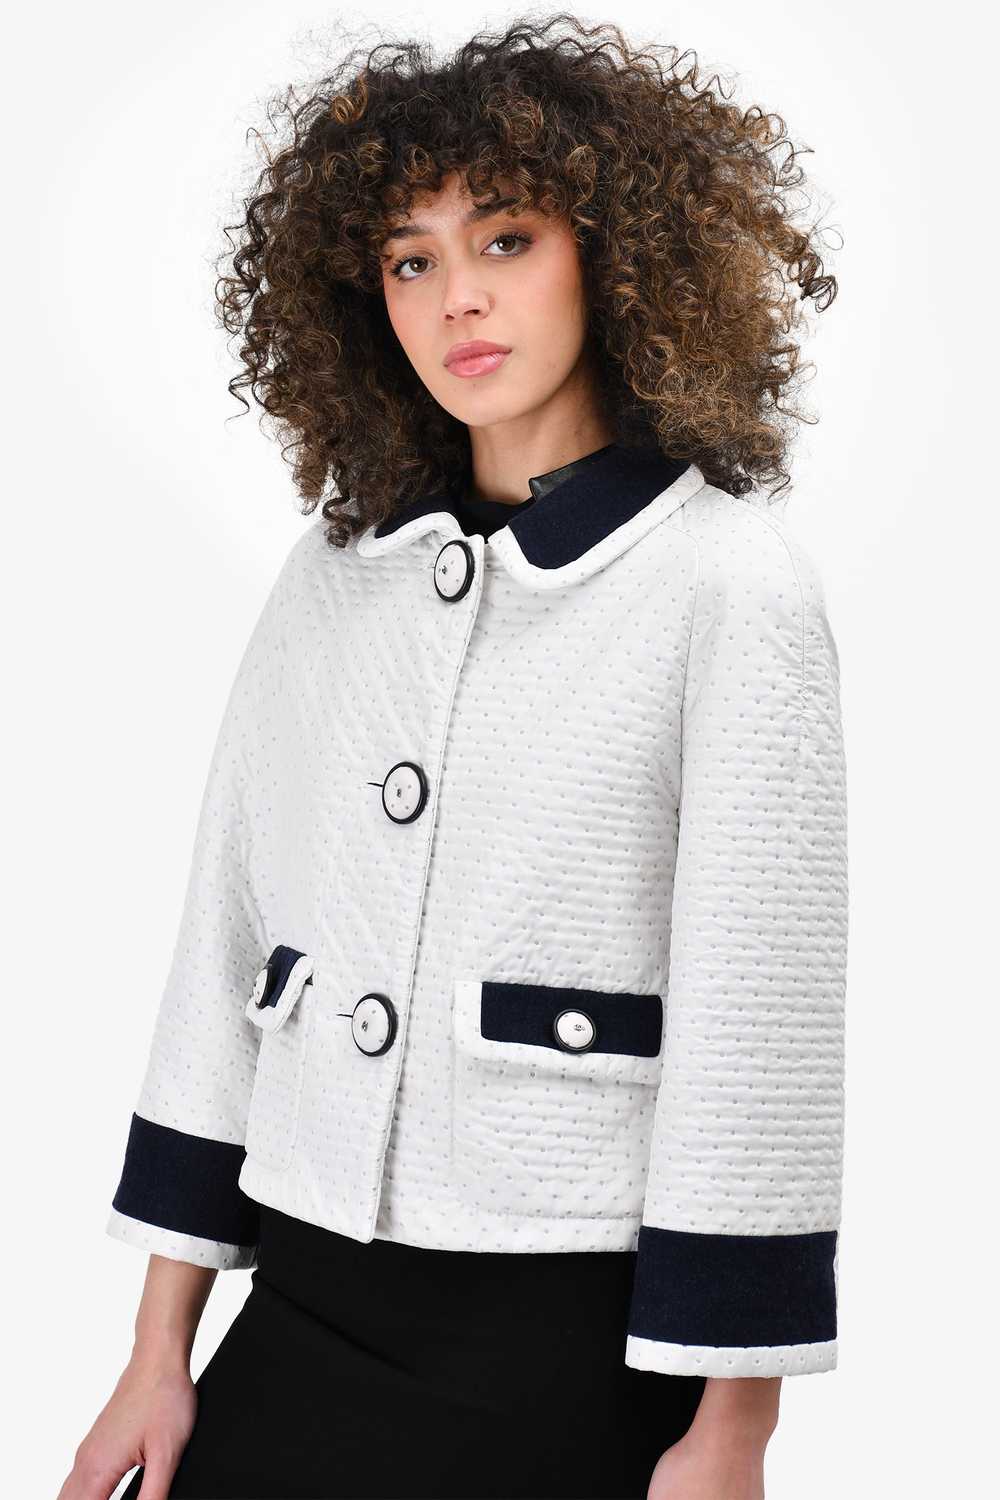 Pre-Loved Chanel™ White Perforated Fabric Jacket … - image 3